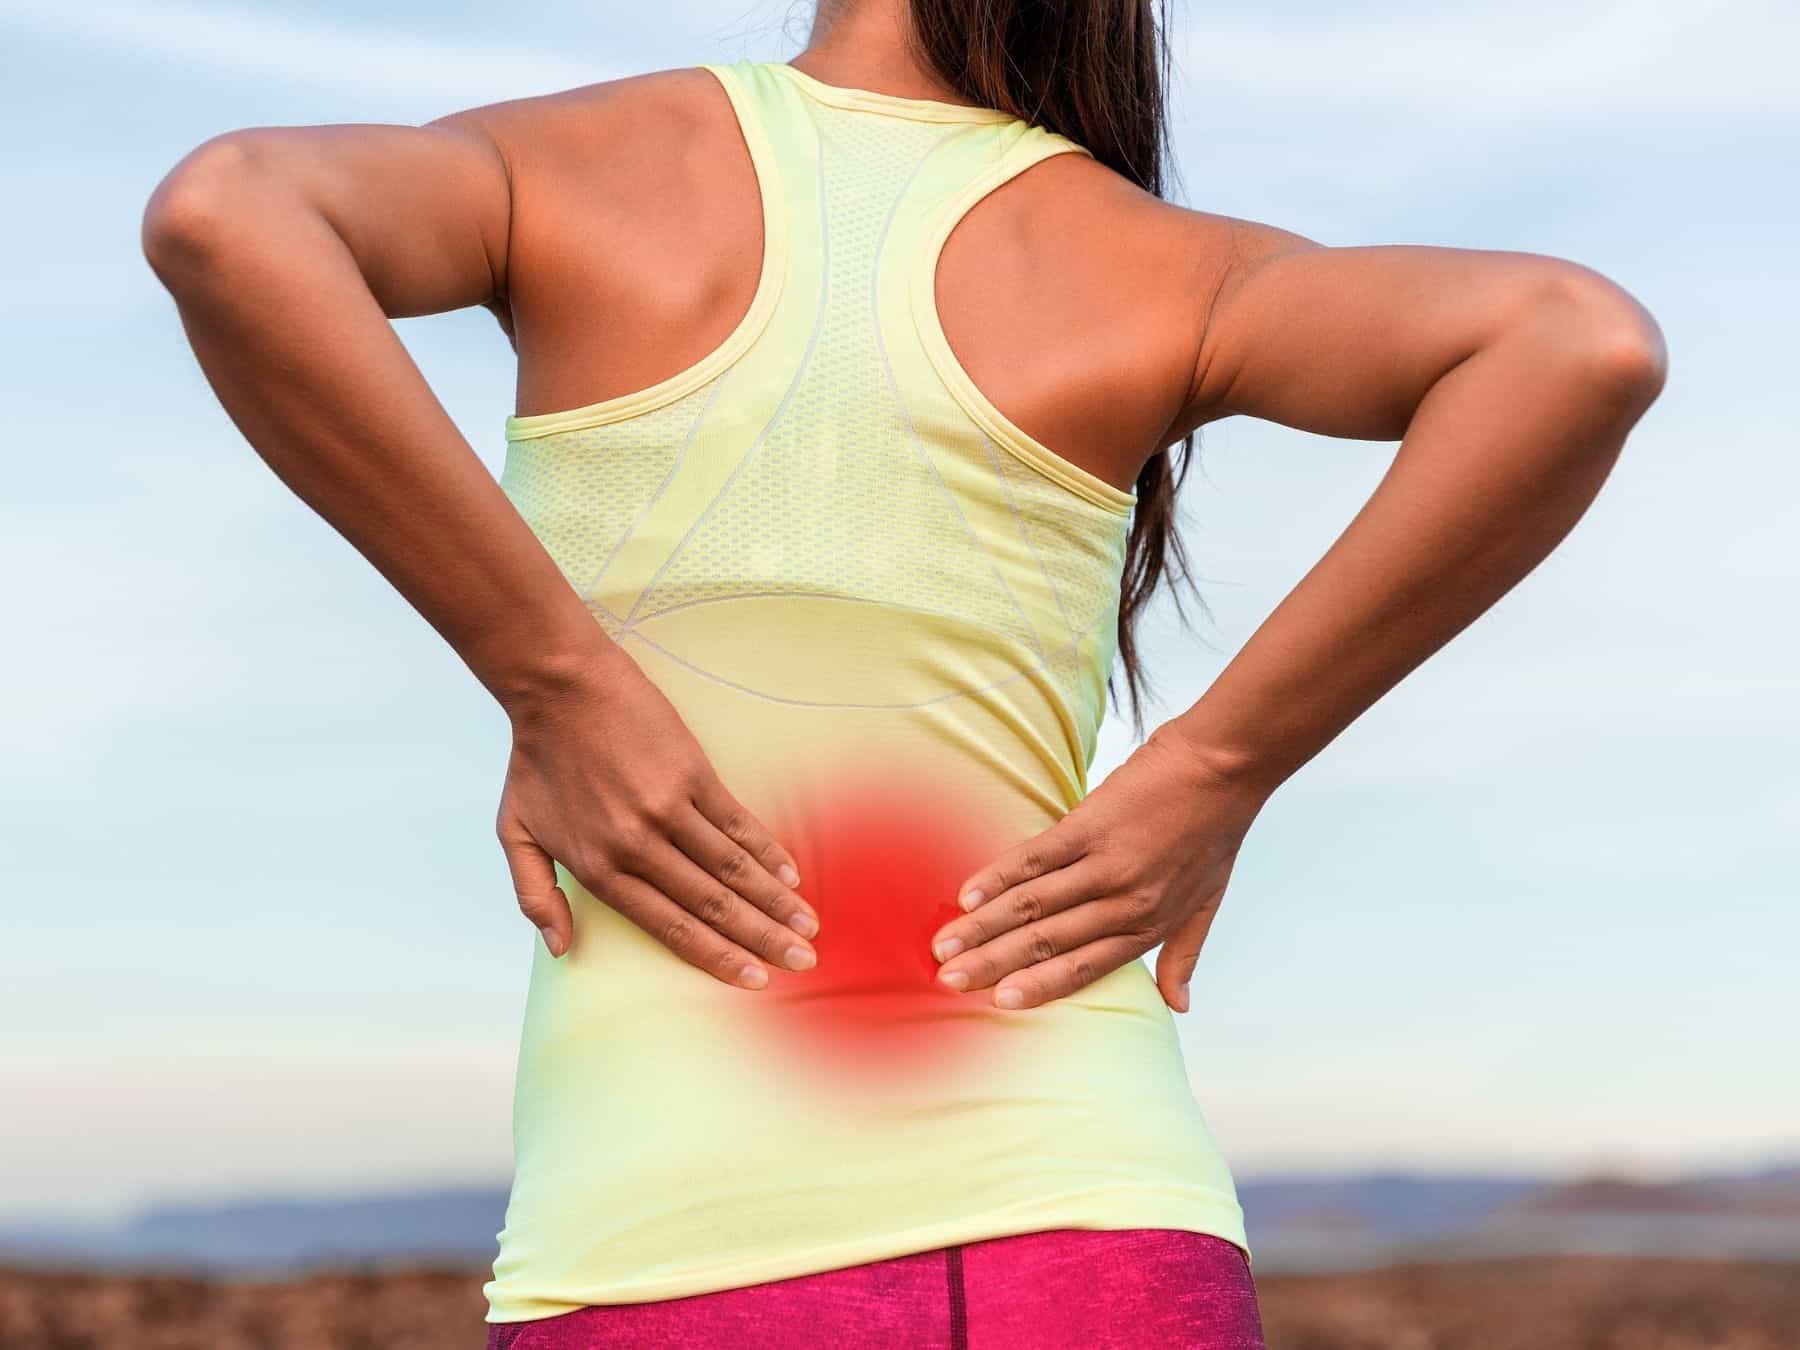 Woman with back pain holding her lower back